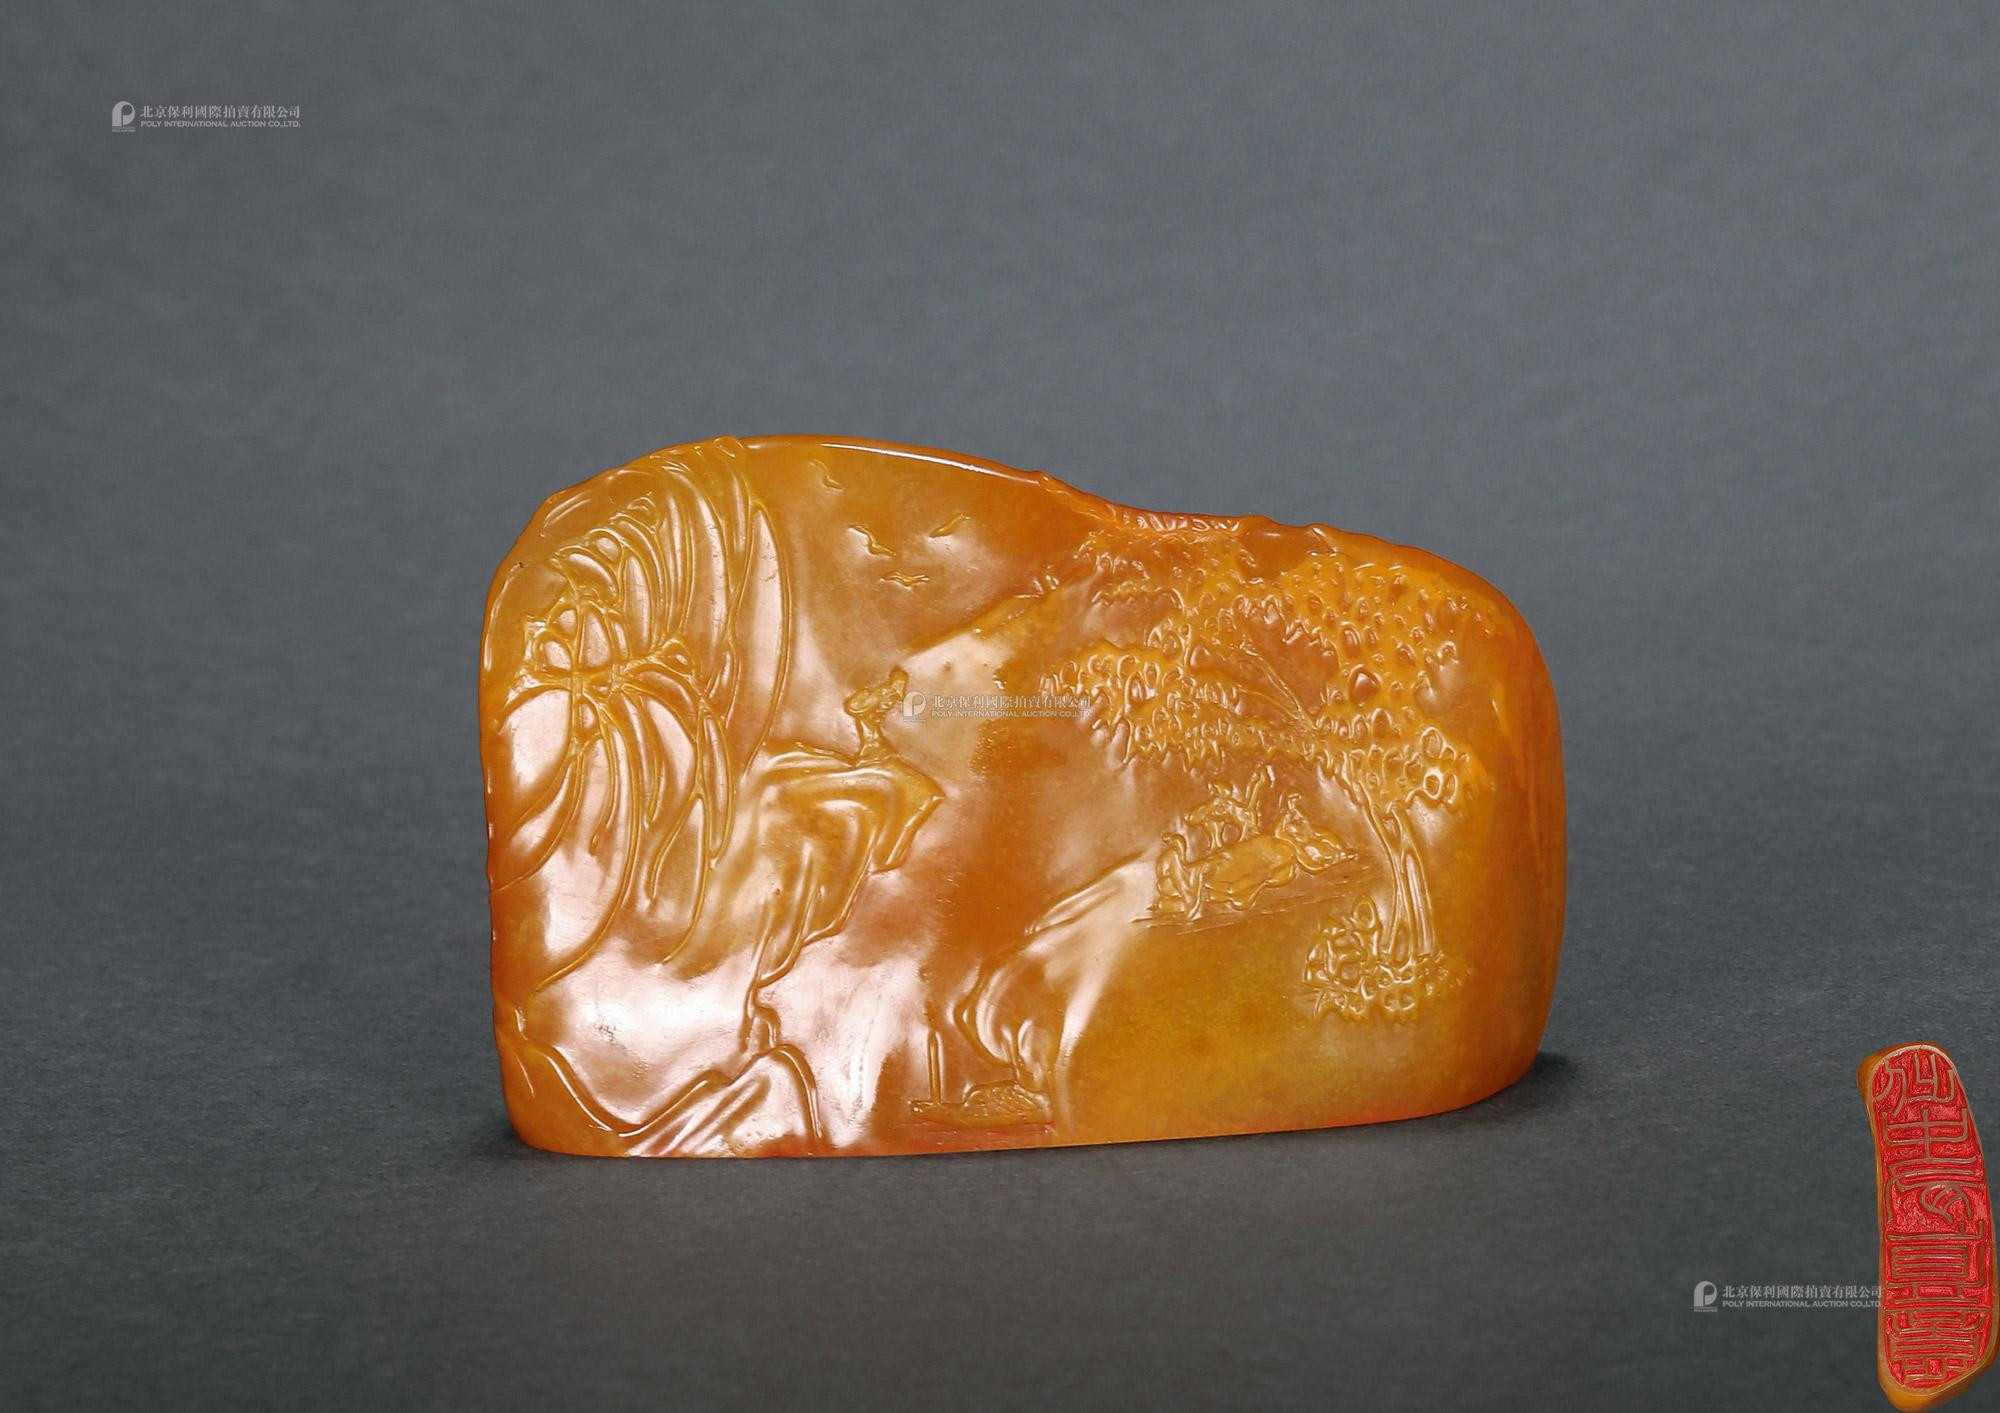 A NATURALLY SHAPED TIANHUANG STONE SEAL IN SHALLOW RELIEF